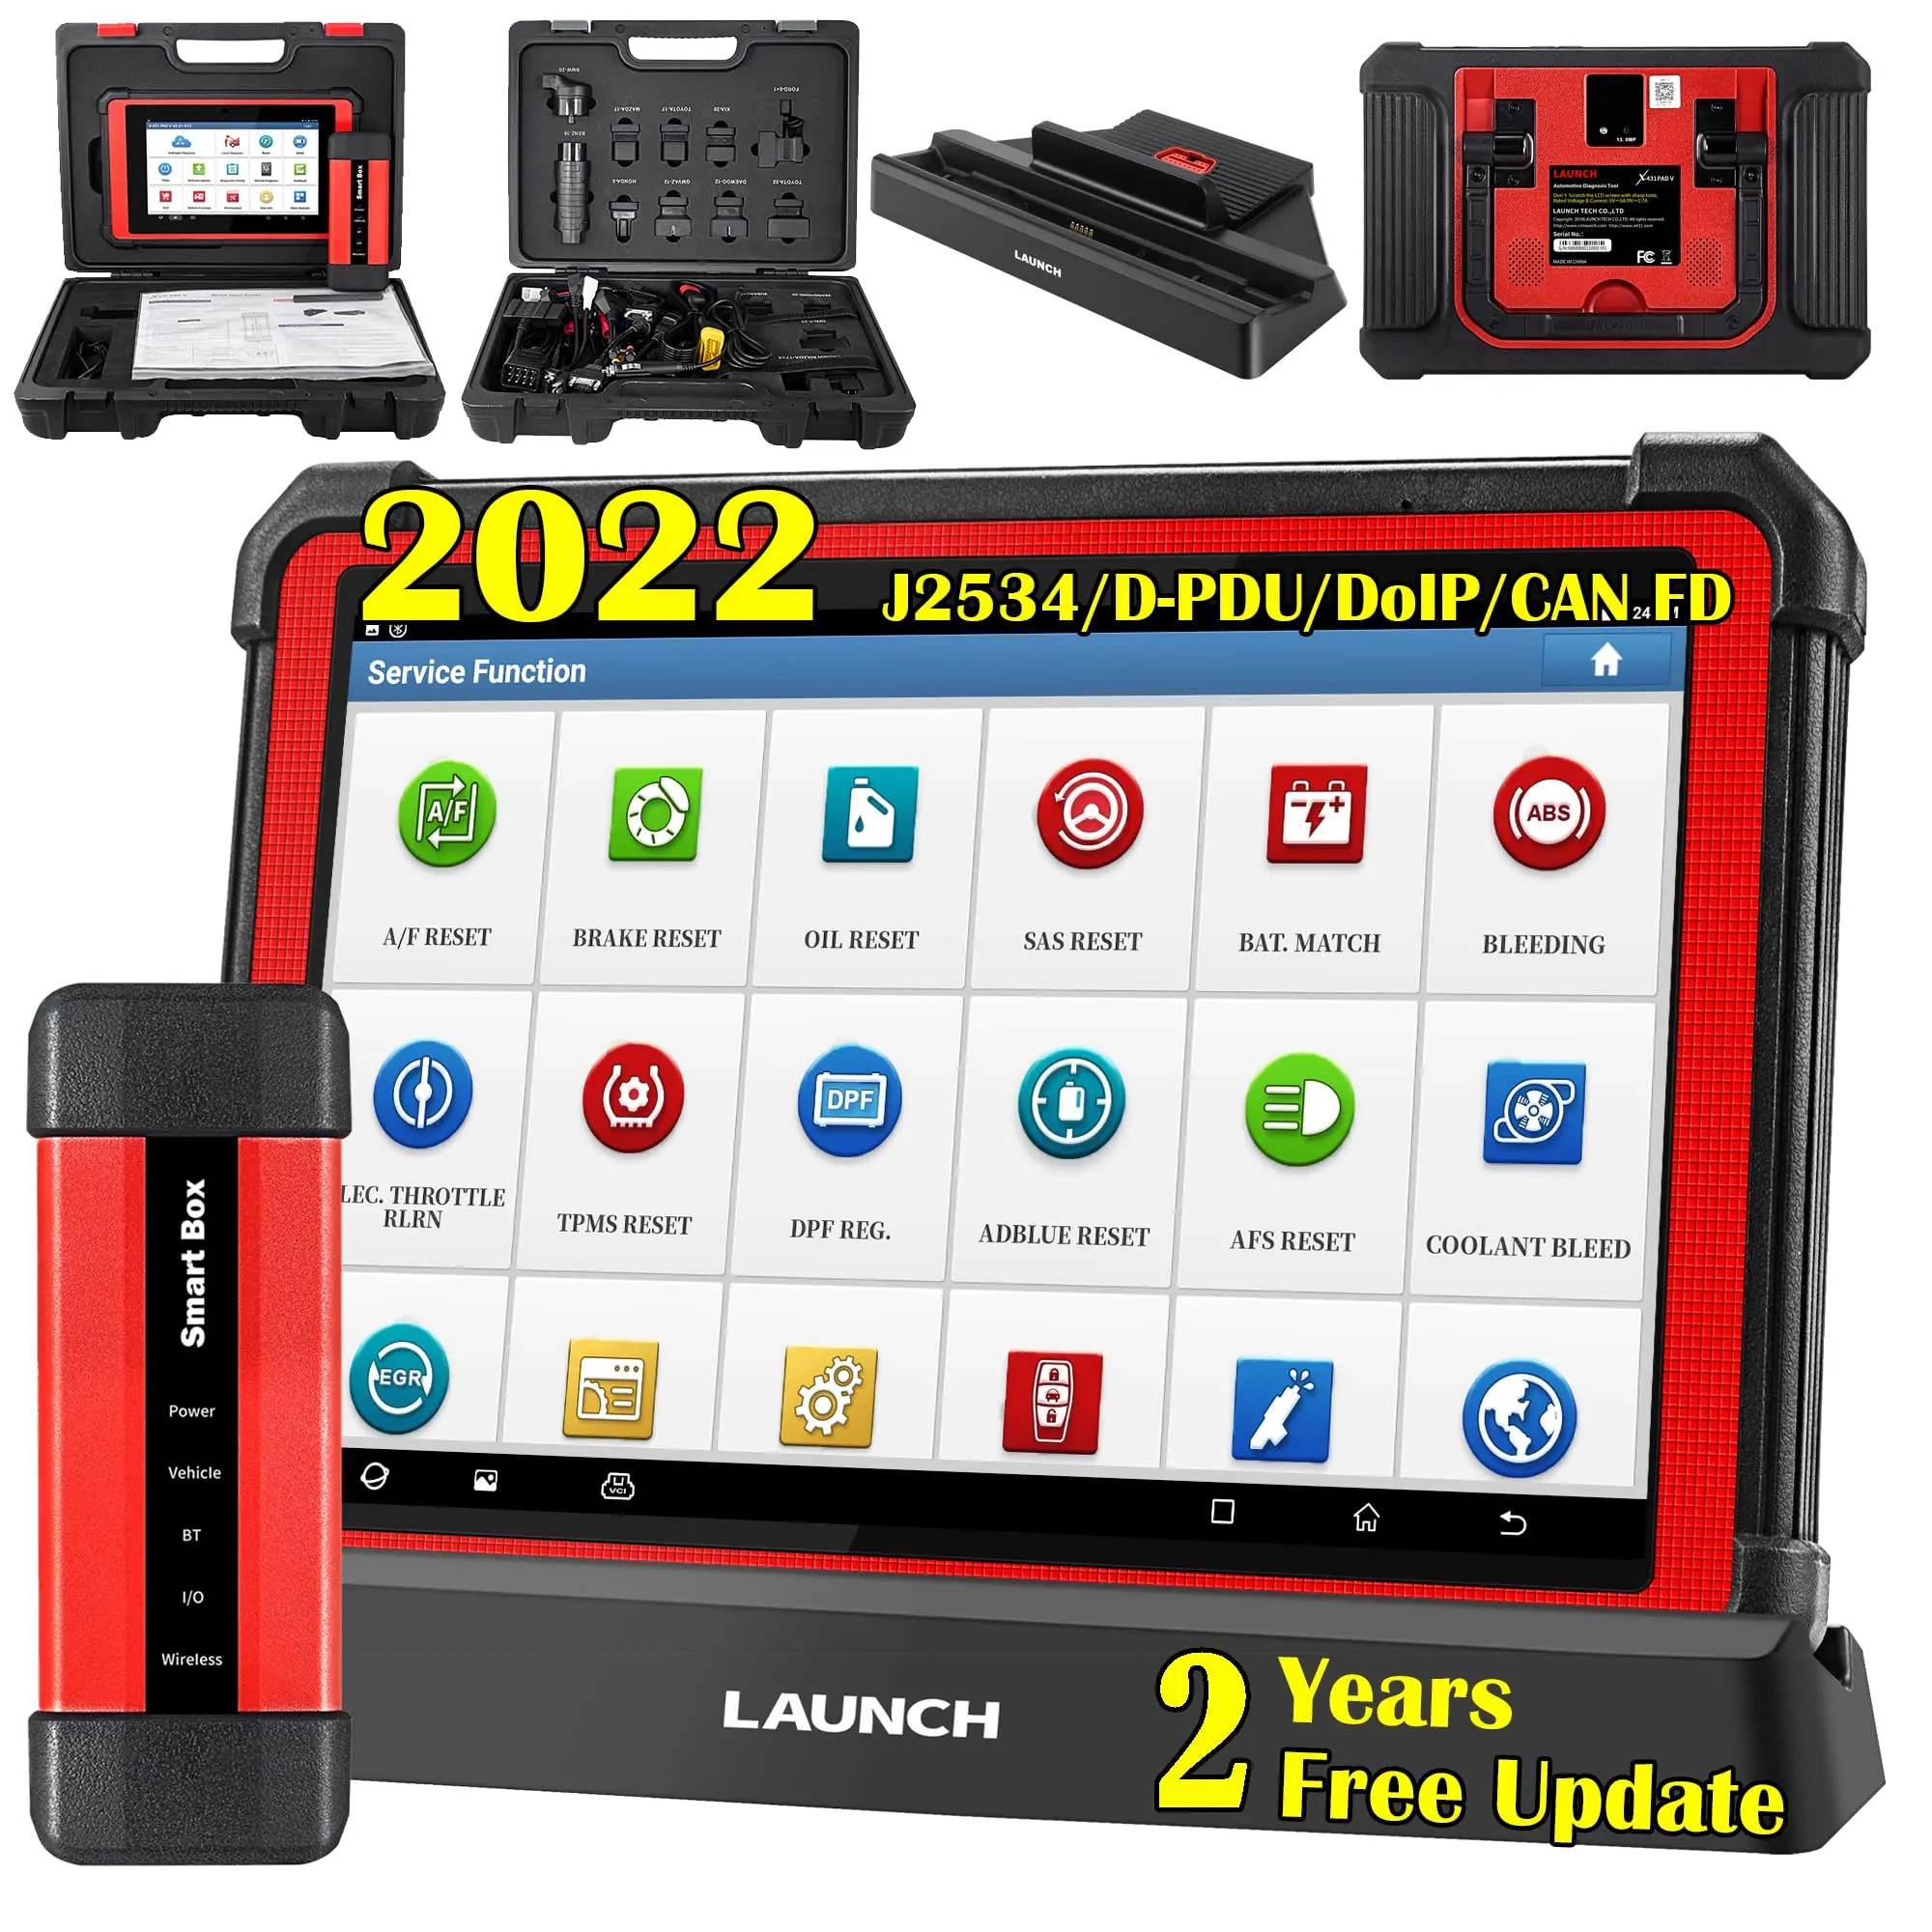 

Launch X431 Pad V Scanner Car Obd2 Software Update Free 2 Years Heavy Duty Truck Key Programming Machine Diagnostic Tool